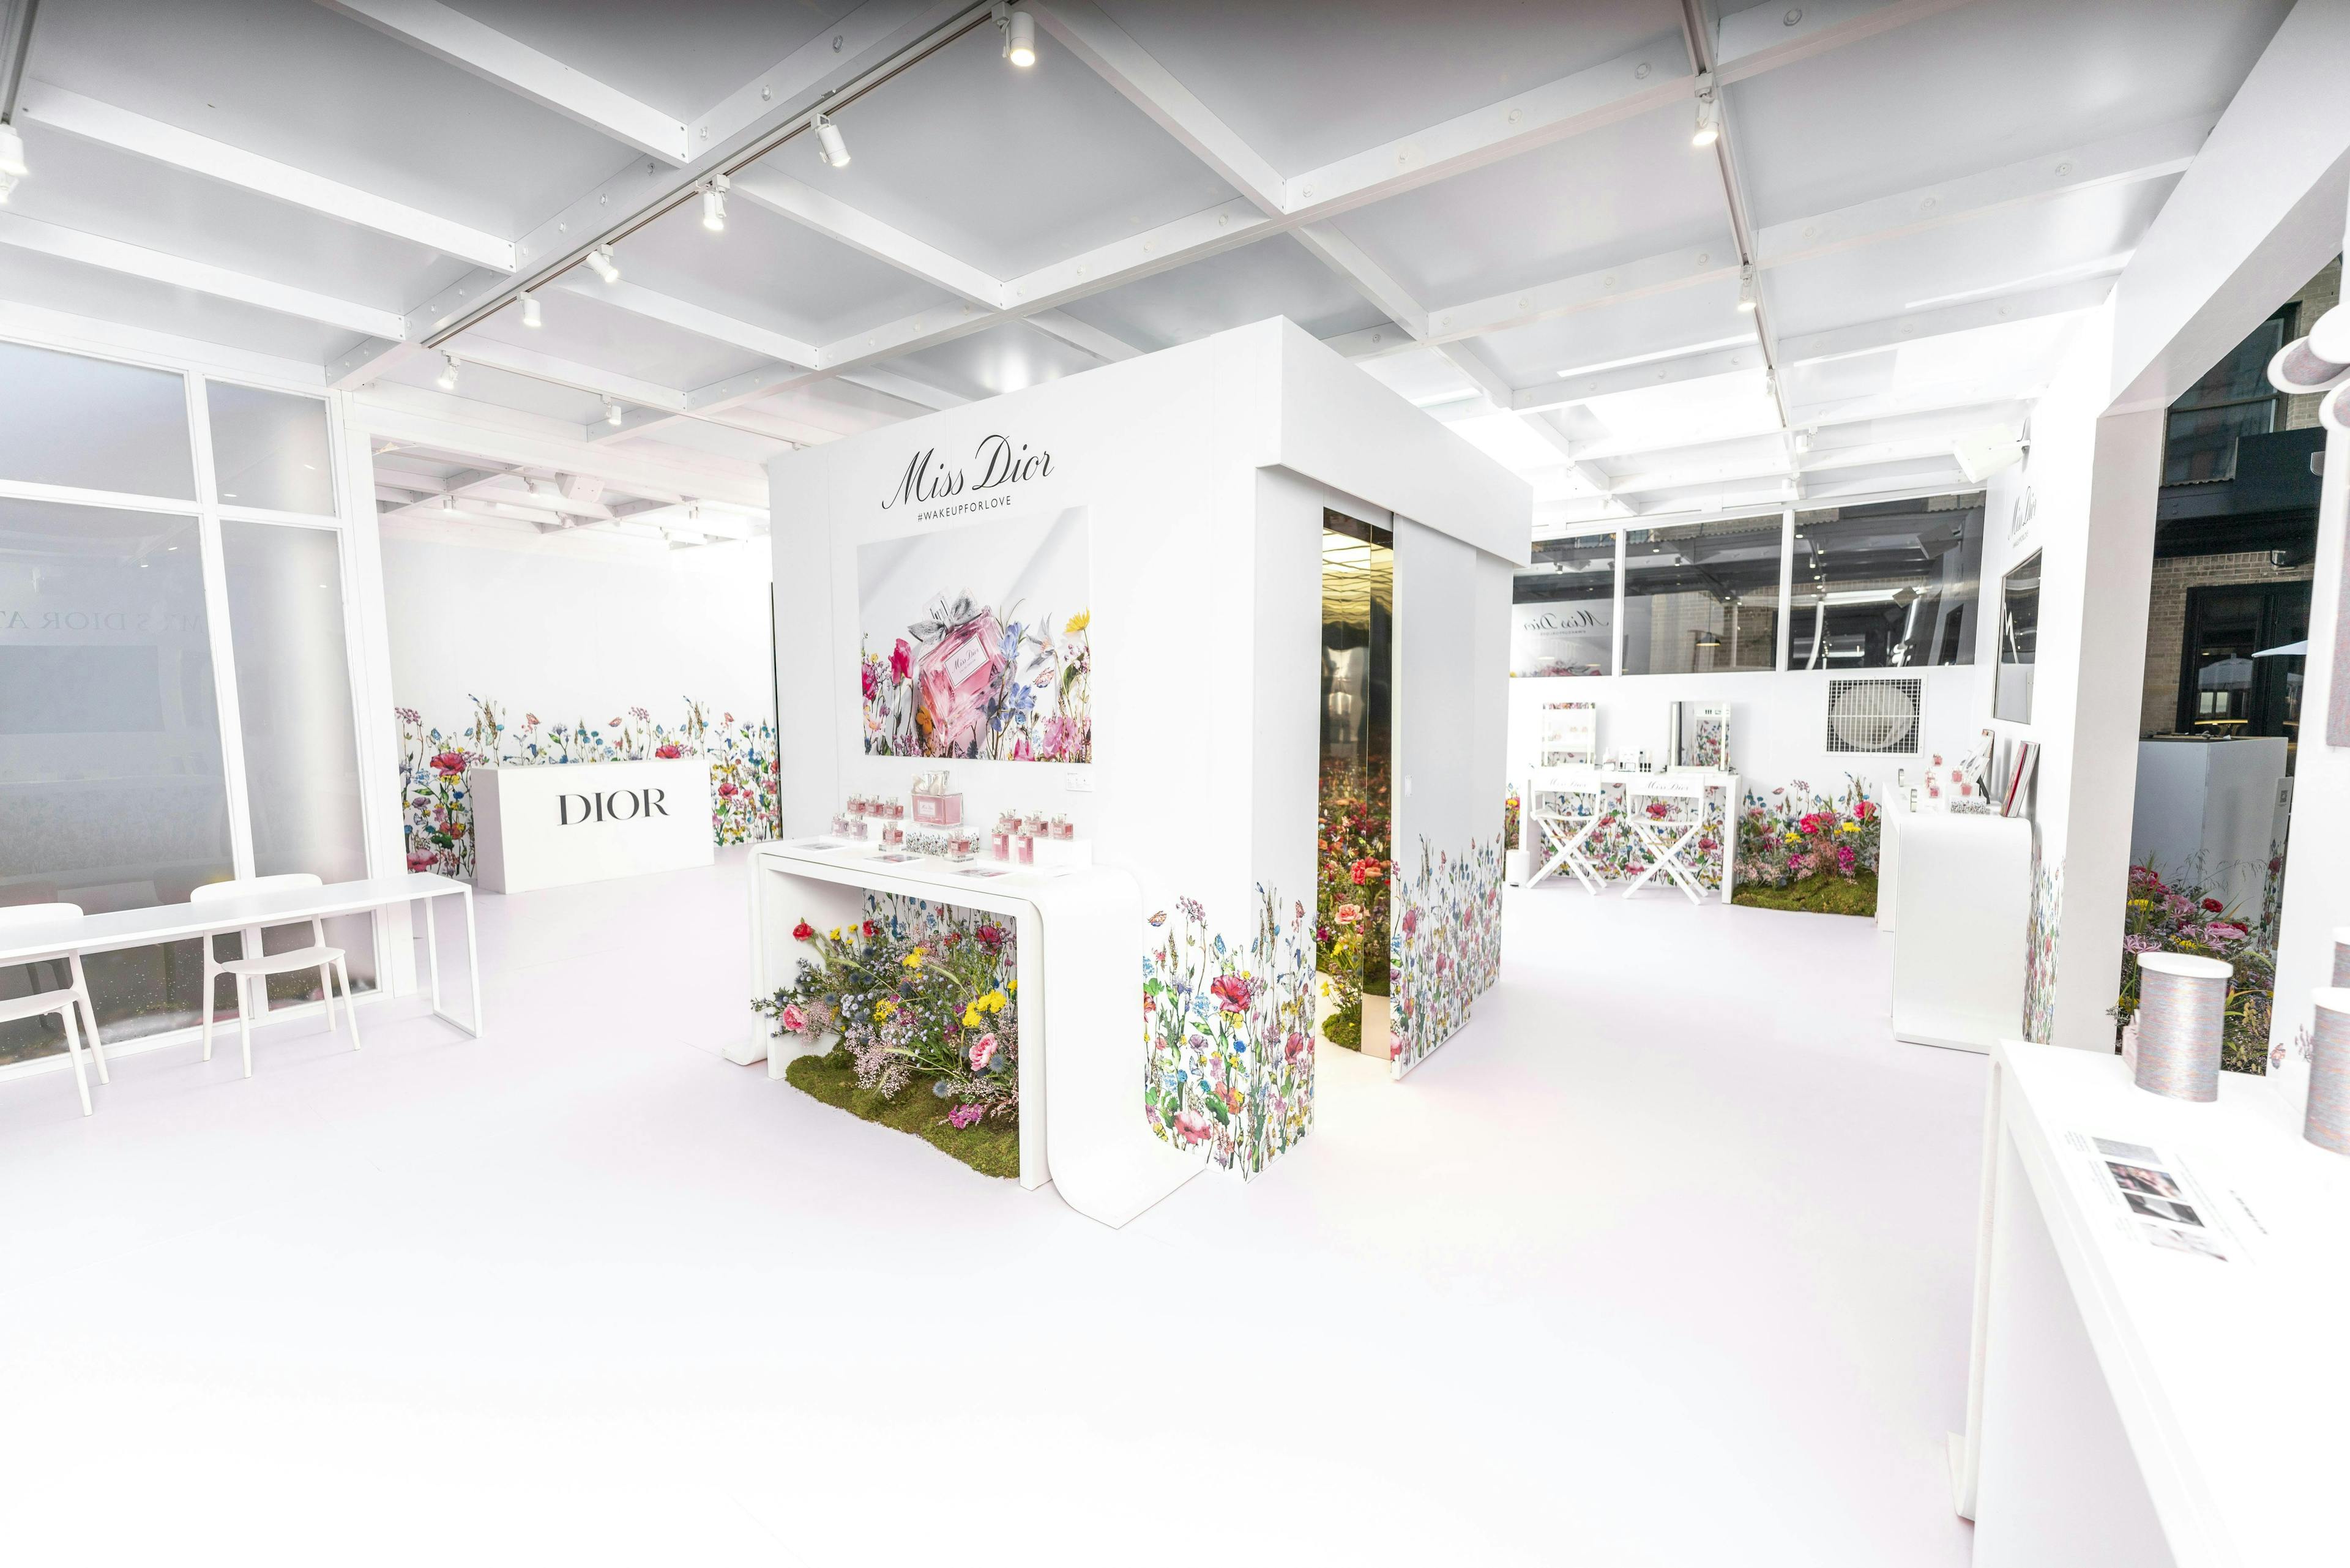 Dior Relaunches Its Iconic Perfume Miss Dior With a Floral Pop-Up Shop ...